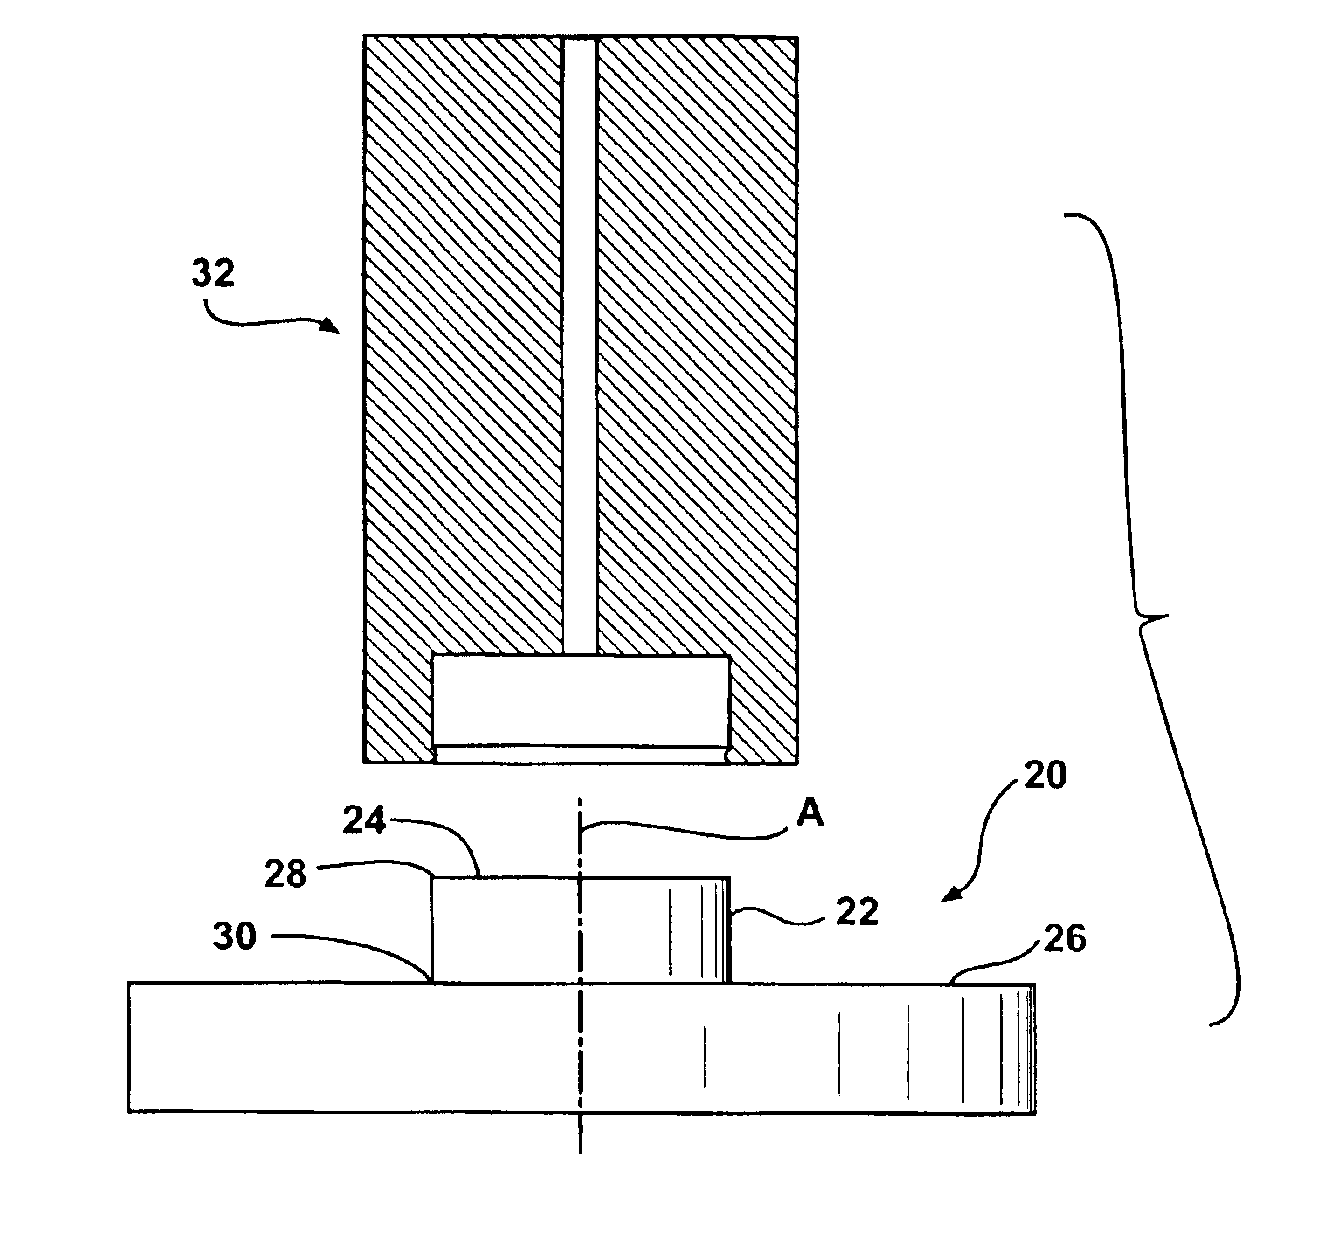 Method of producing surface densified metal articles